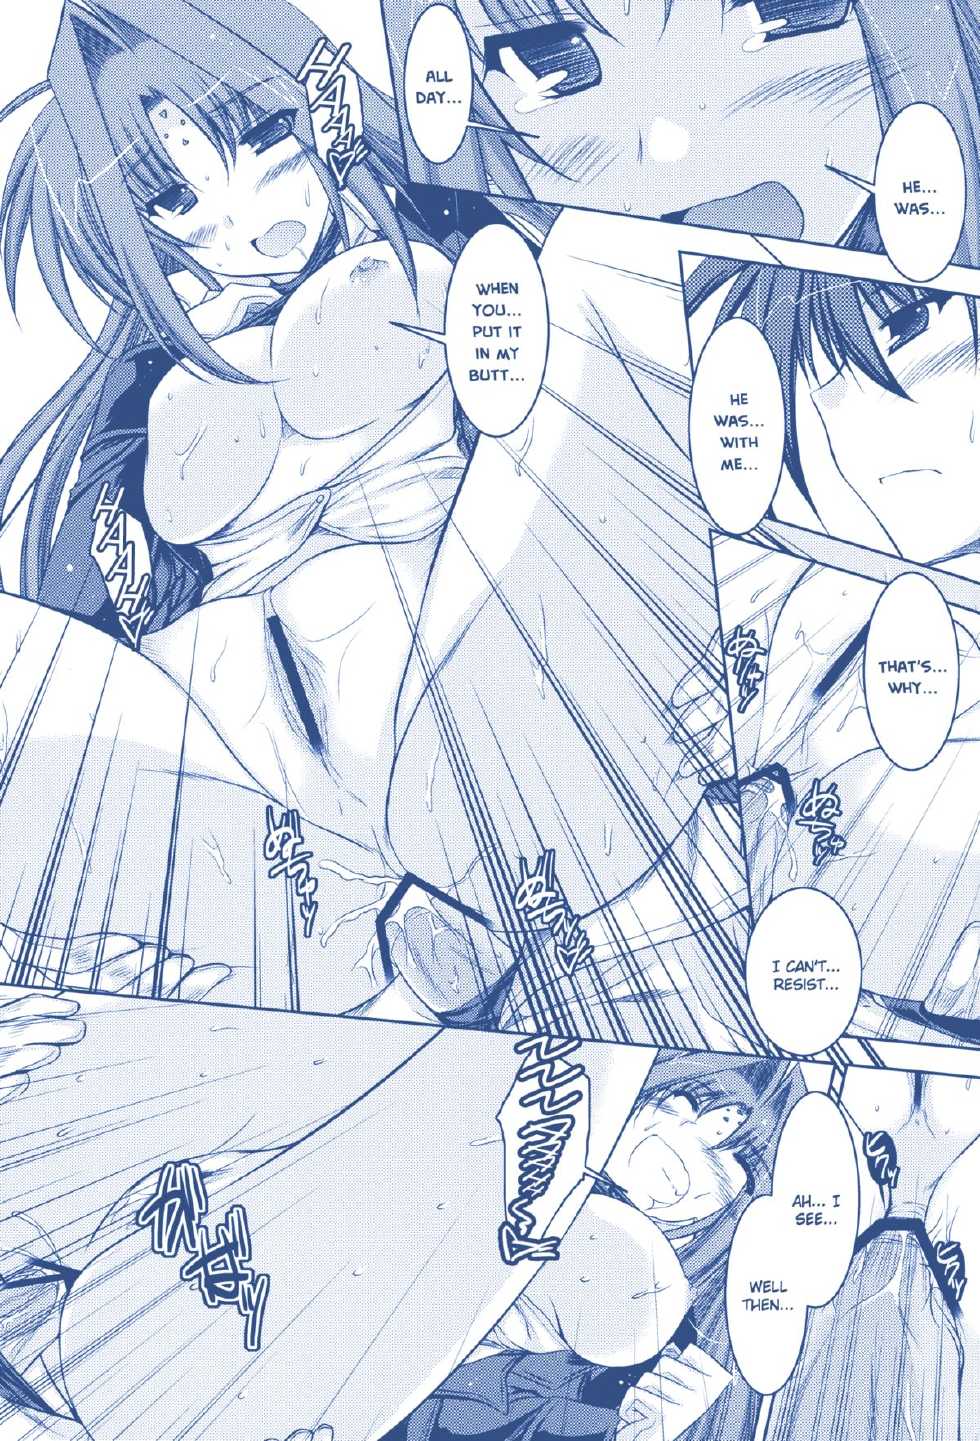 (C74) [ELHEART'S (Ibuki Pon)] ANOTHER FRONTIER 02 Magical Girl Lyrical Lindy-san #03 (Magical Girl Lyrical Nanoha StrikerS) [English] - Page 31